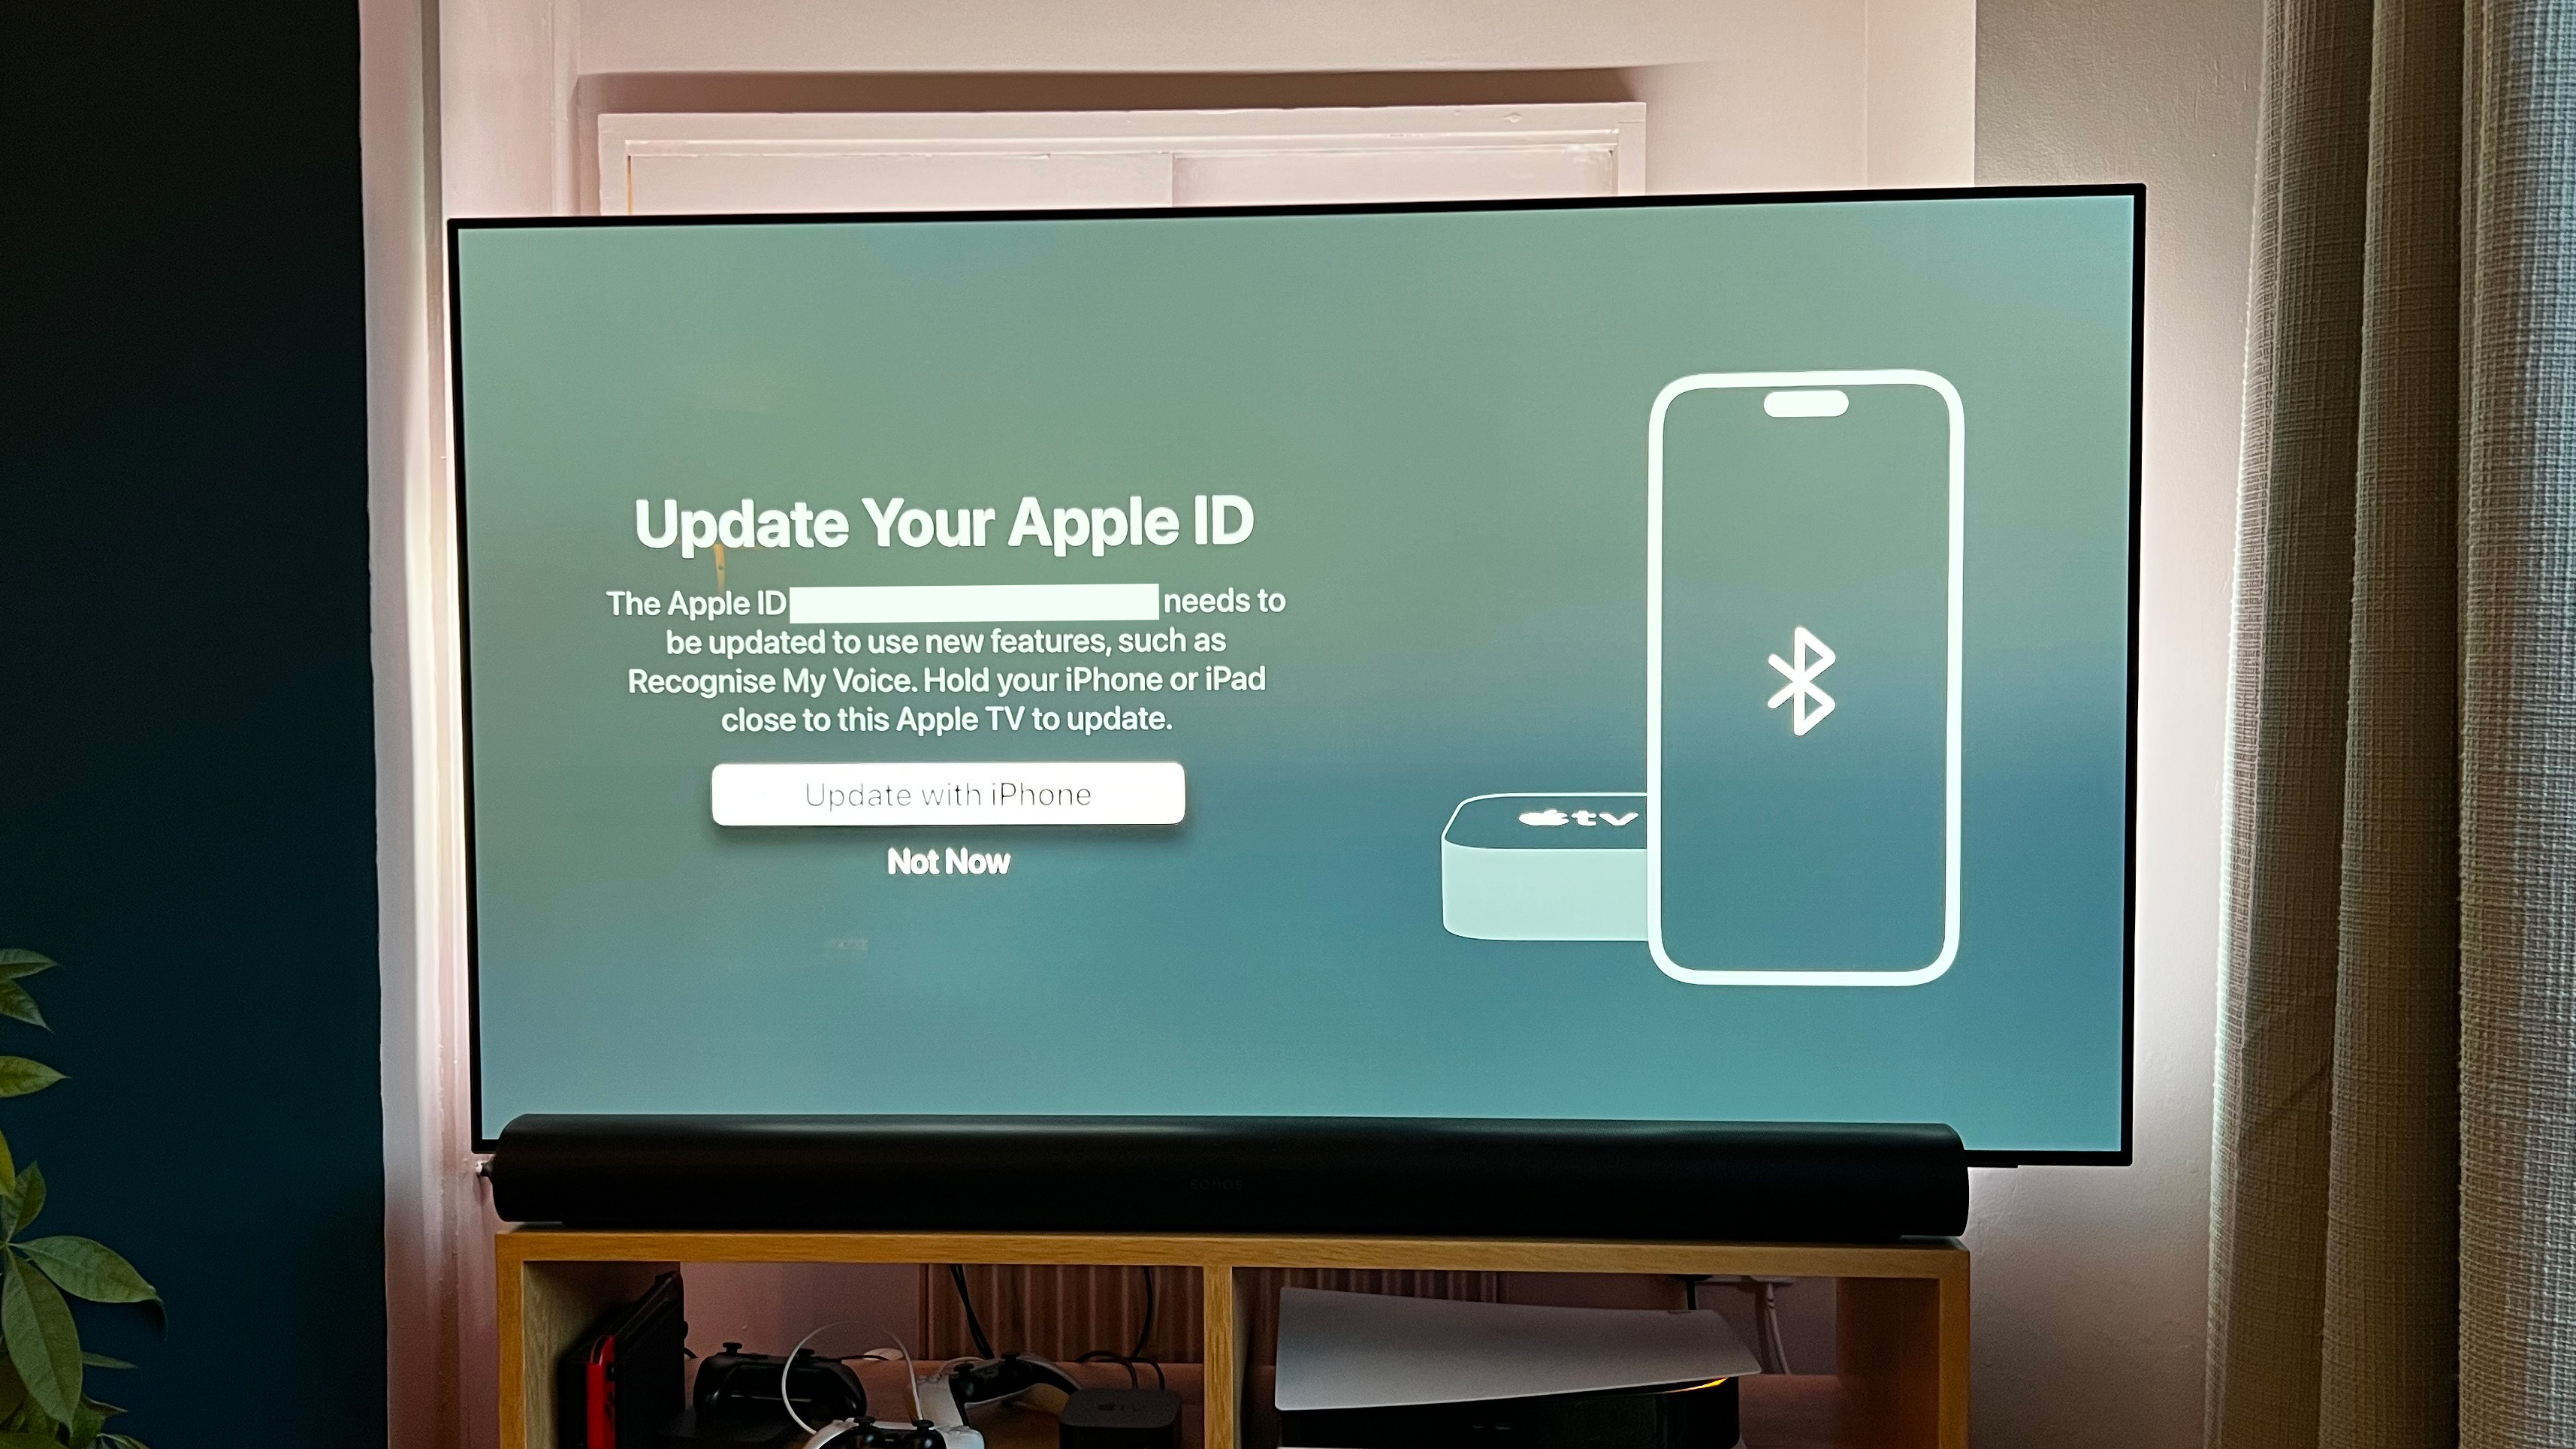 Can Apple TV be used without iPhone?